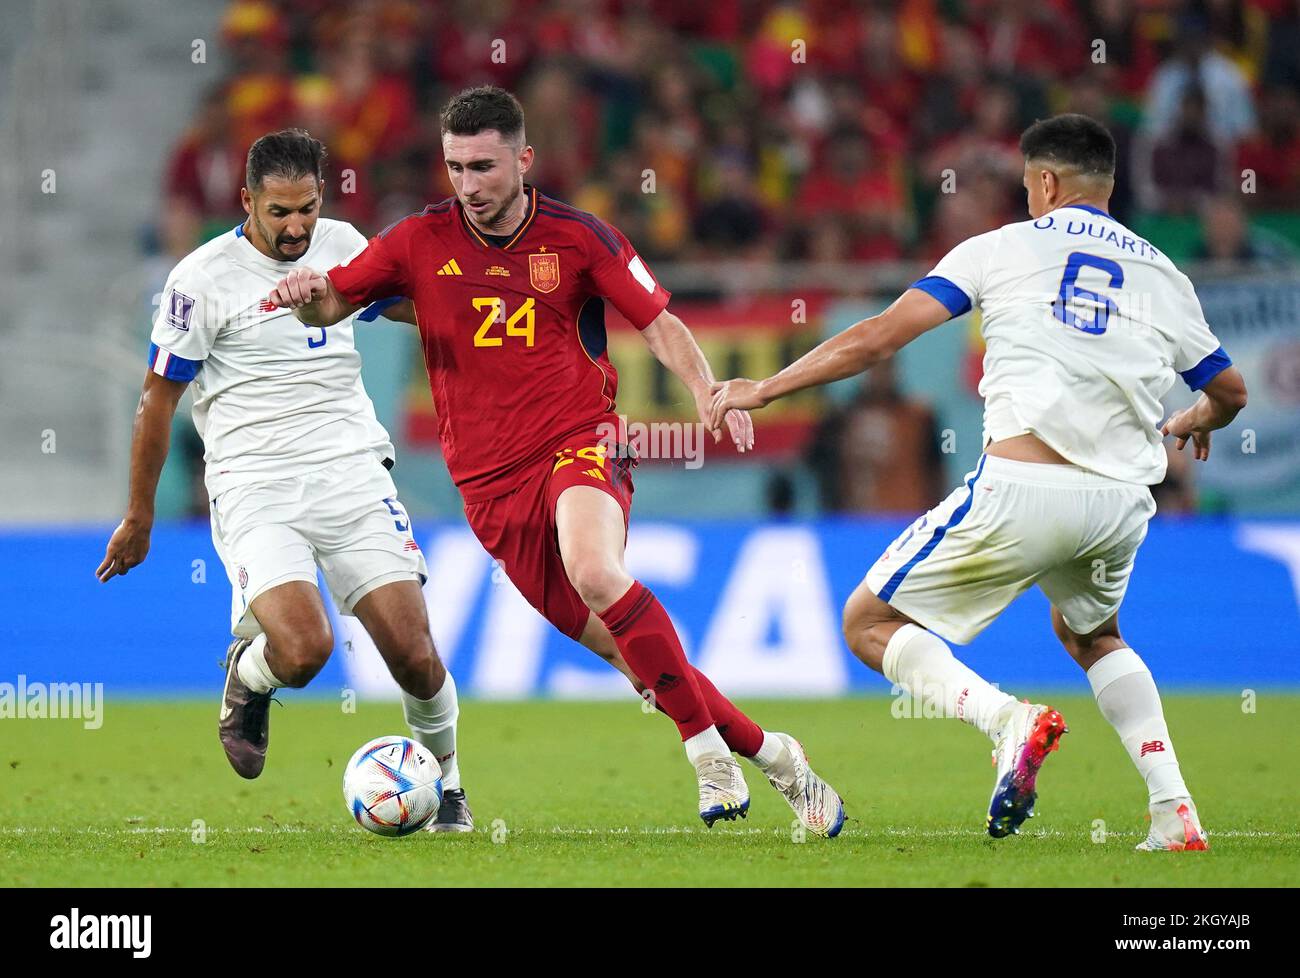 Costa Rica's Celso Borges, Spain's Aymeric Laporte and Costa Rica's Oscar Duarte (left-right) battle for the ball during the FIFA World Cup Group E match at the Al Thumama Stadium, Doha. Picture date: Wednesday November 23, 2022. Stock Photo